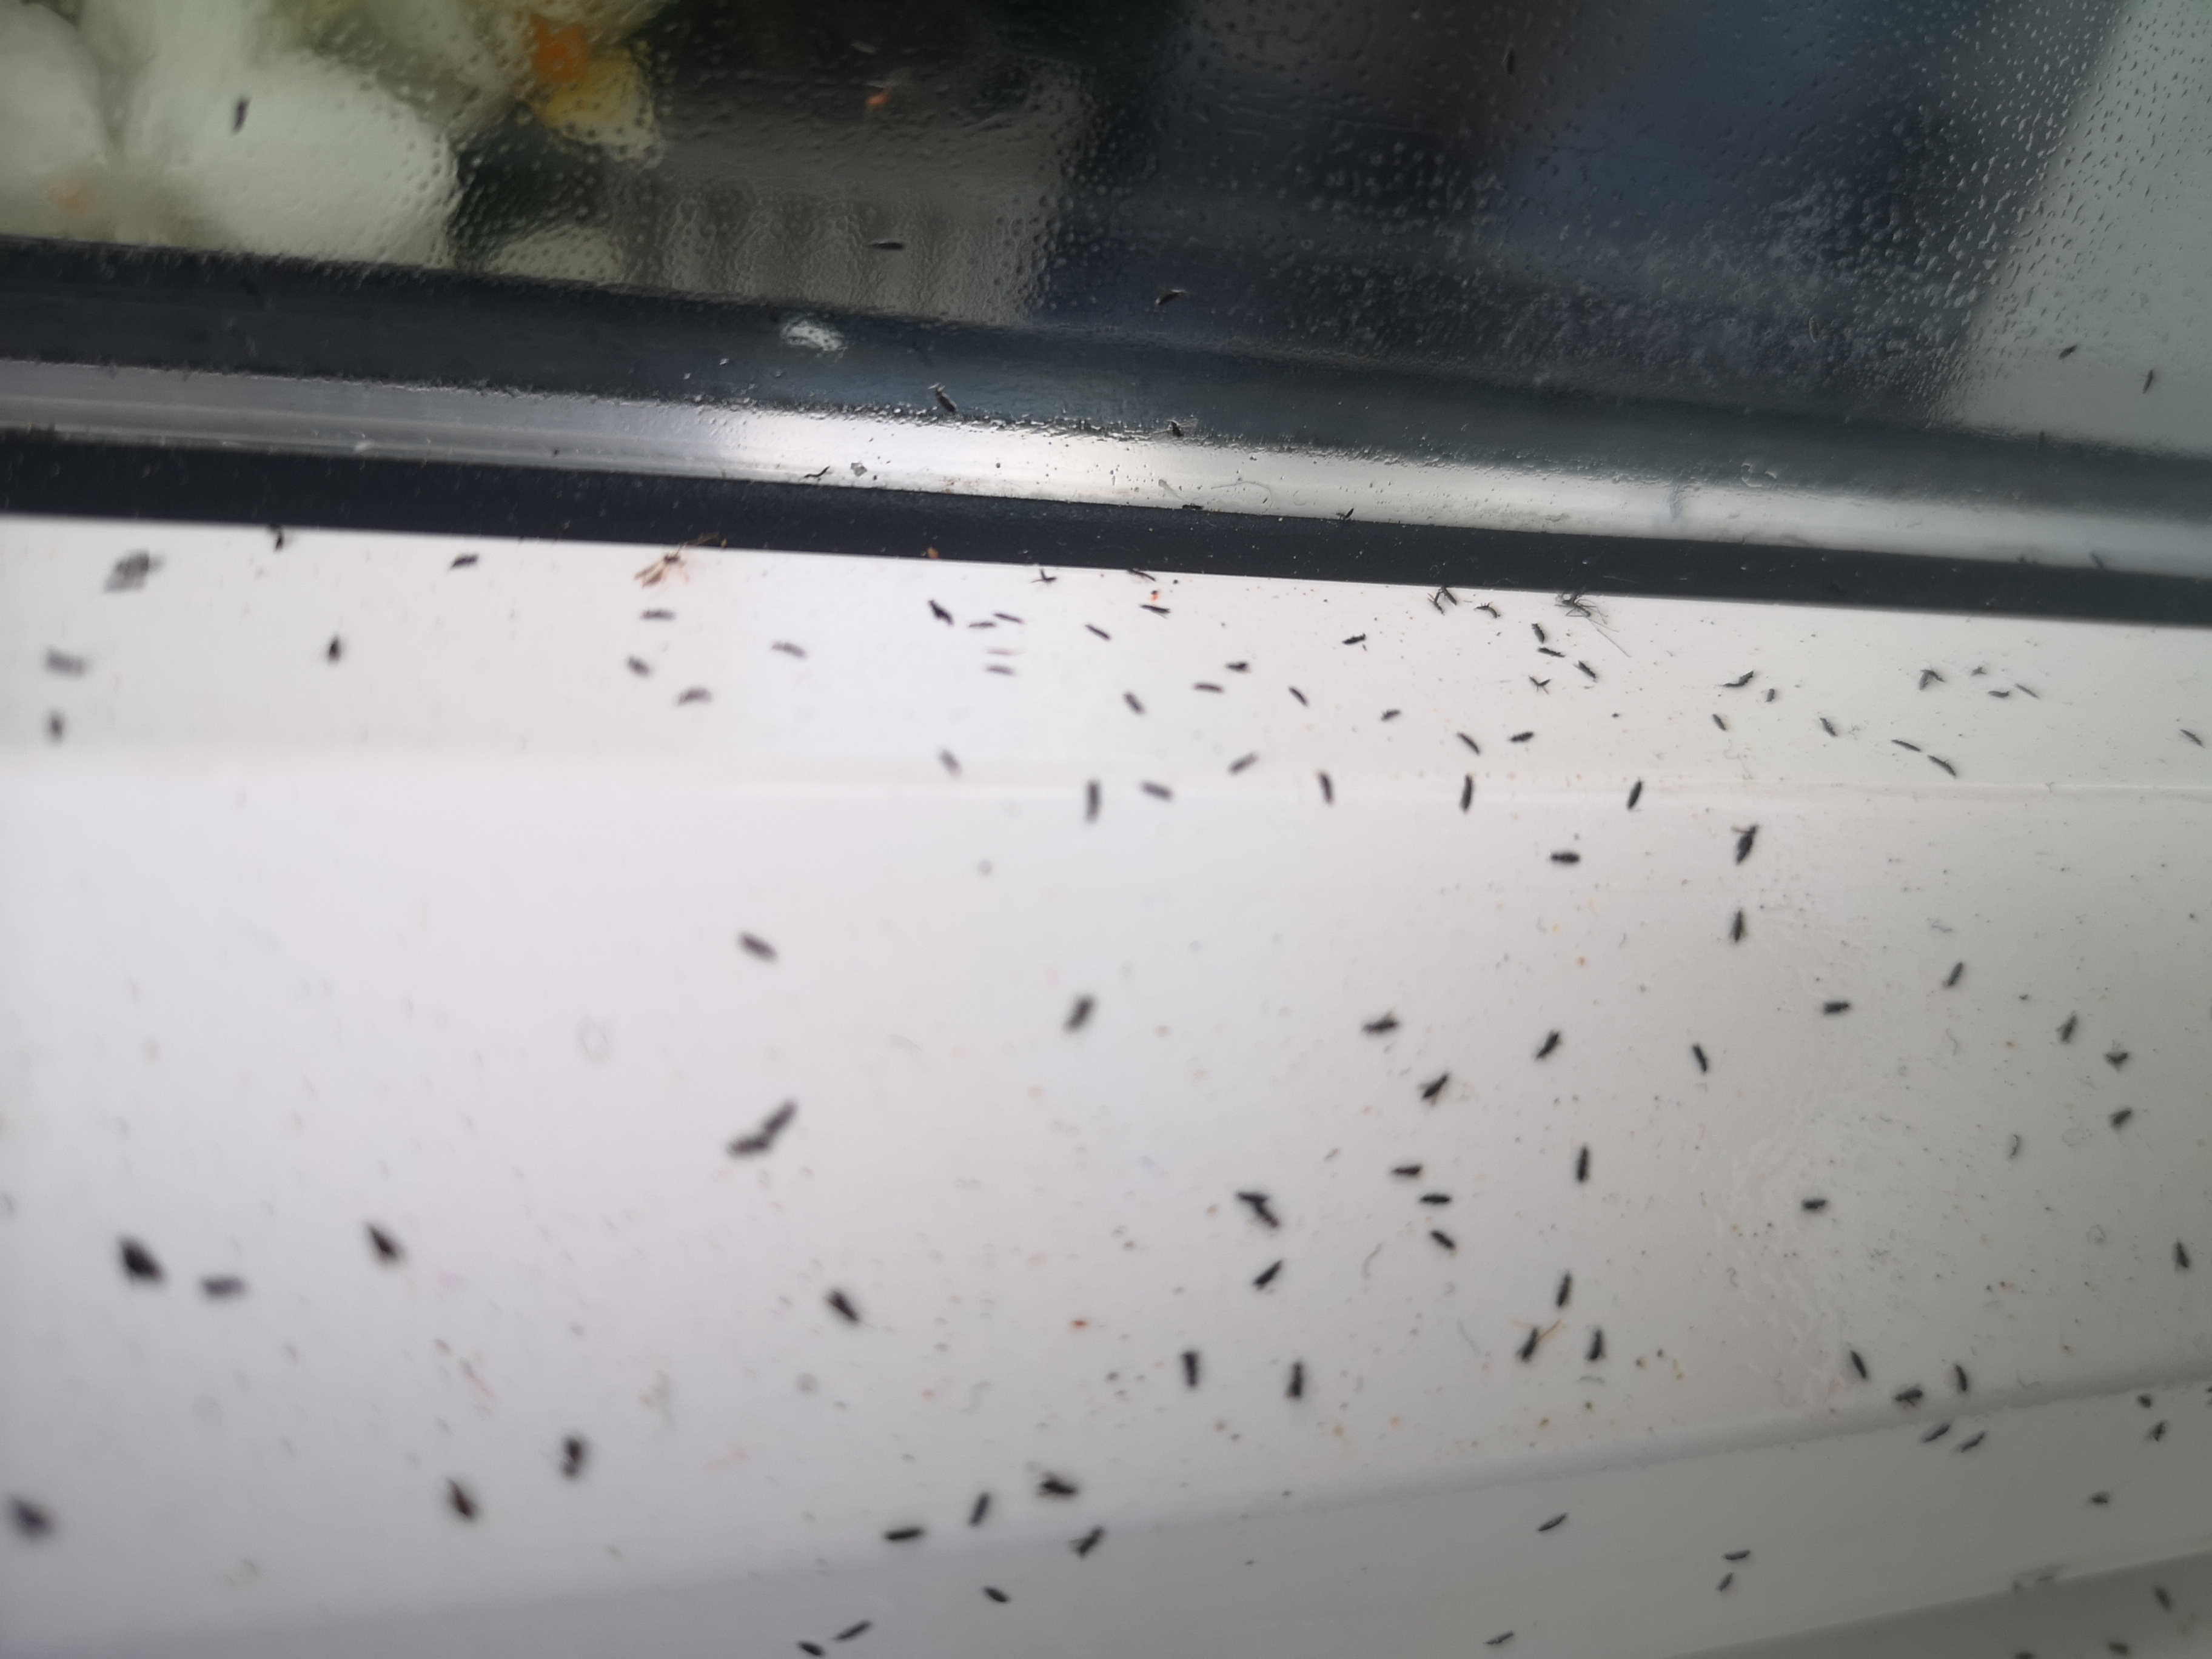 Tiny Bugs On Window Sill Ask Extension